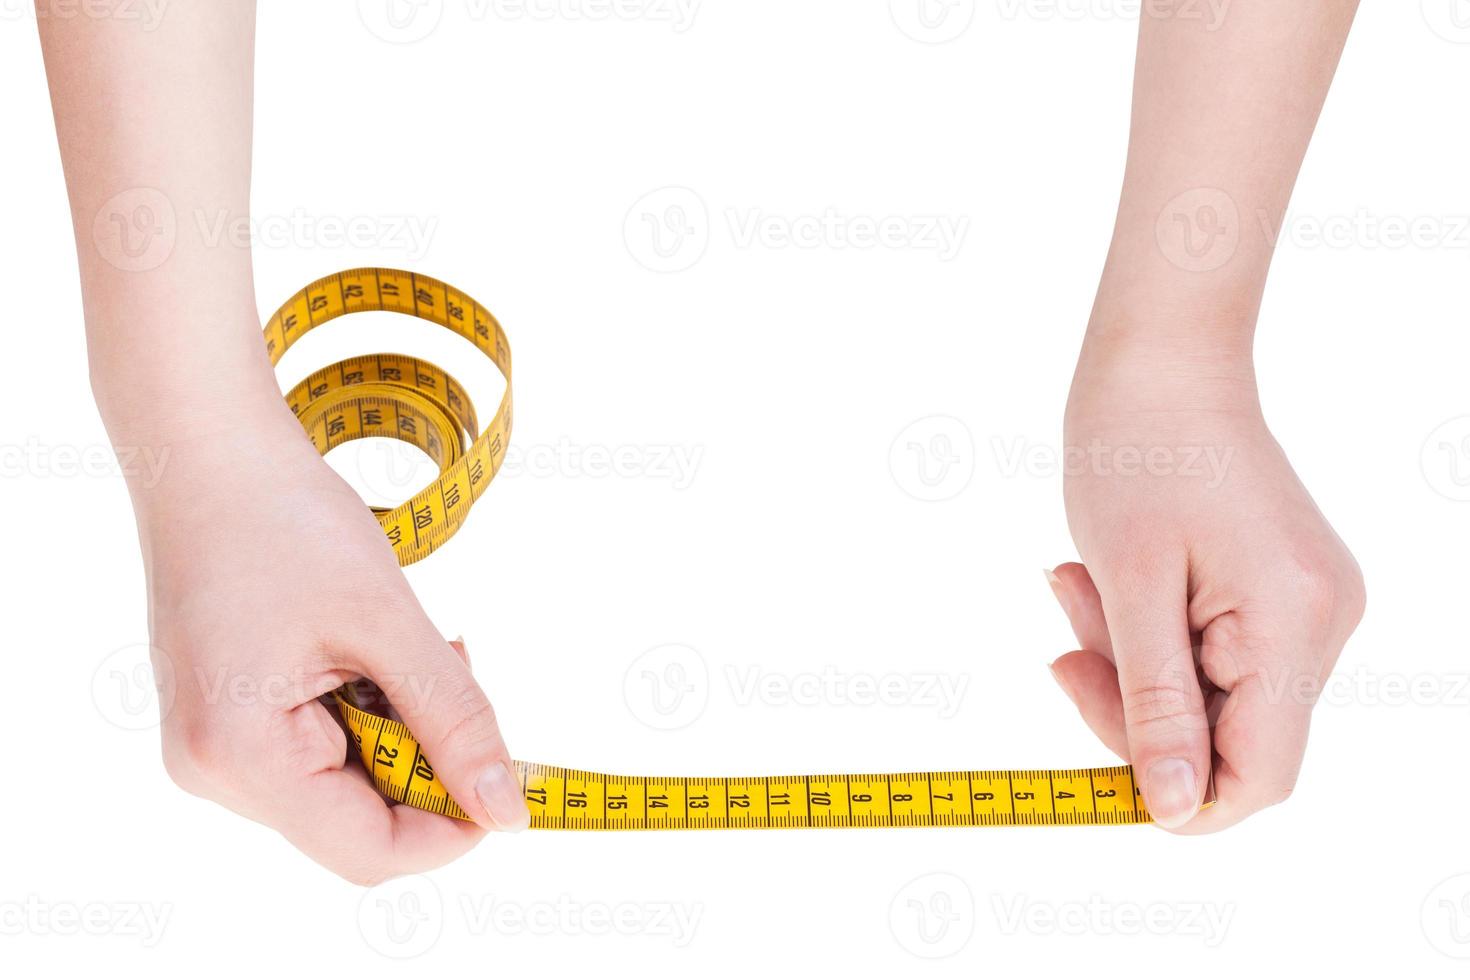 https://static.vecteezy.com/system/resources/previews/012/585/887/non_2x/female-hands-with-tailor-measuring-tape-isolated-photo.jpg